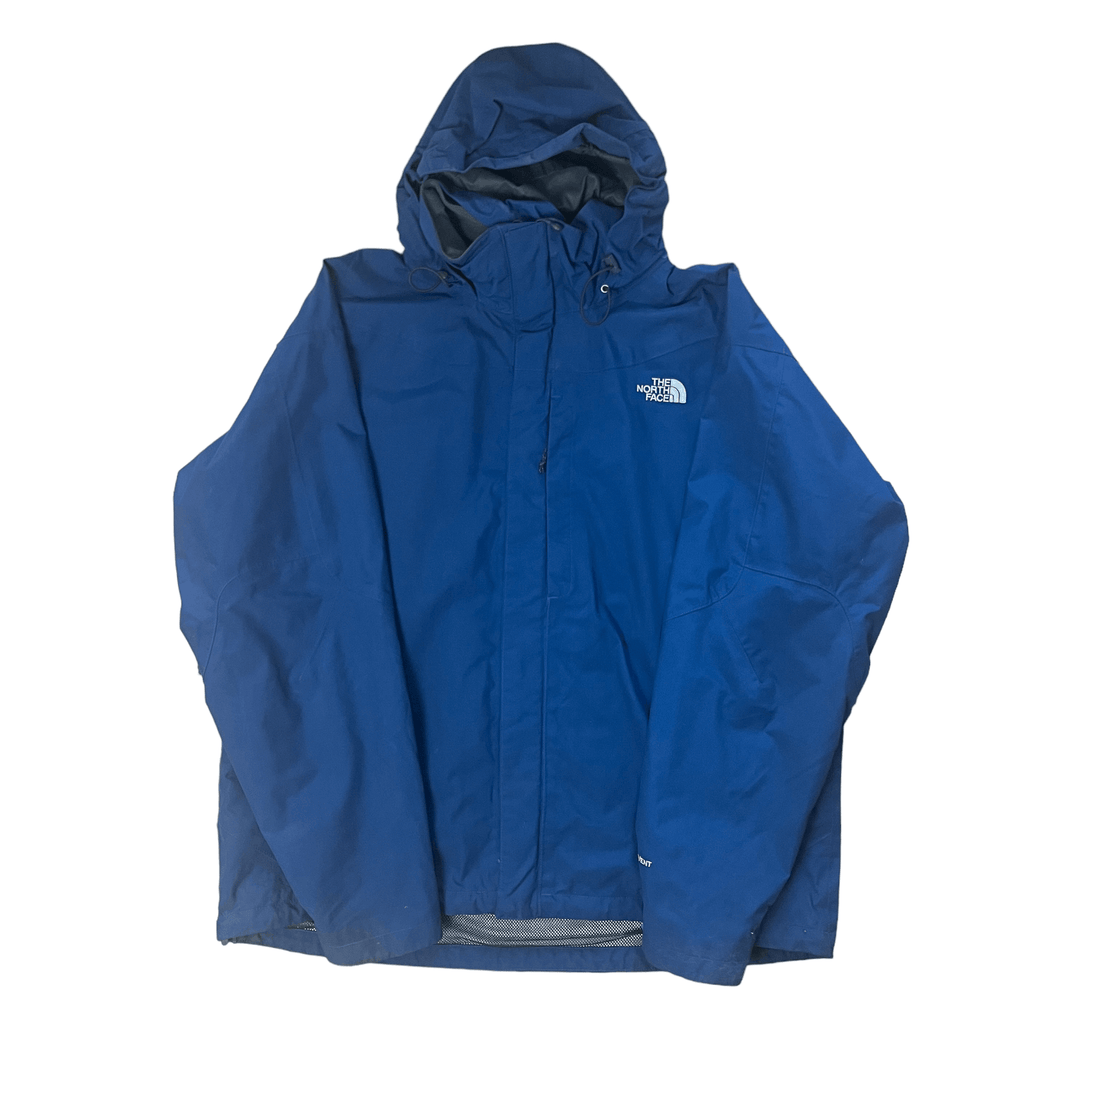 Vintage Blue The North Face (TNF) HyVent Jacket - Extra Large - The Streetwear Studio